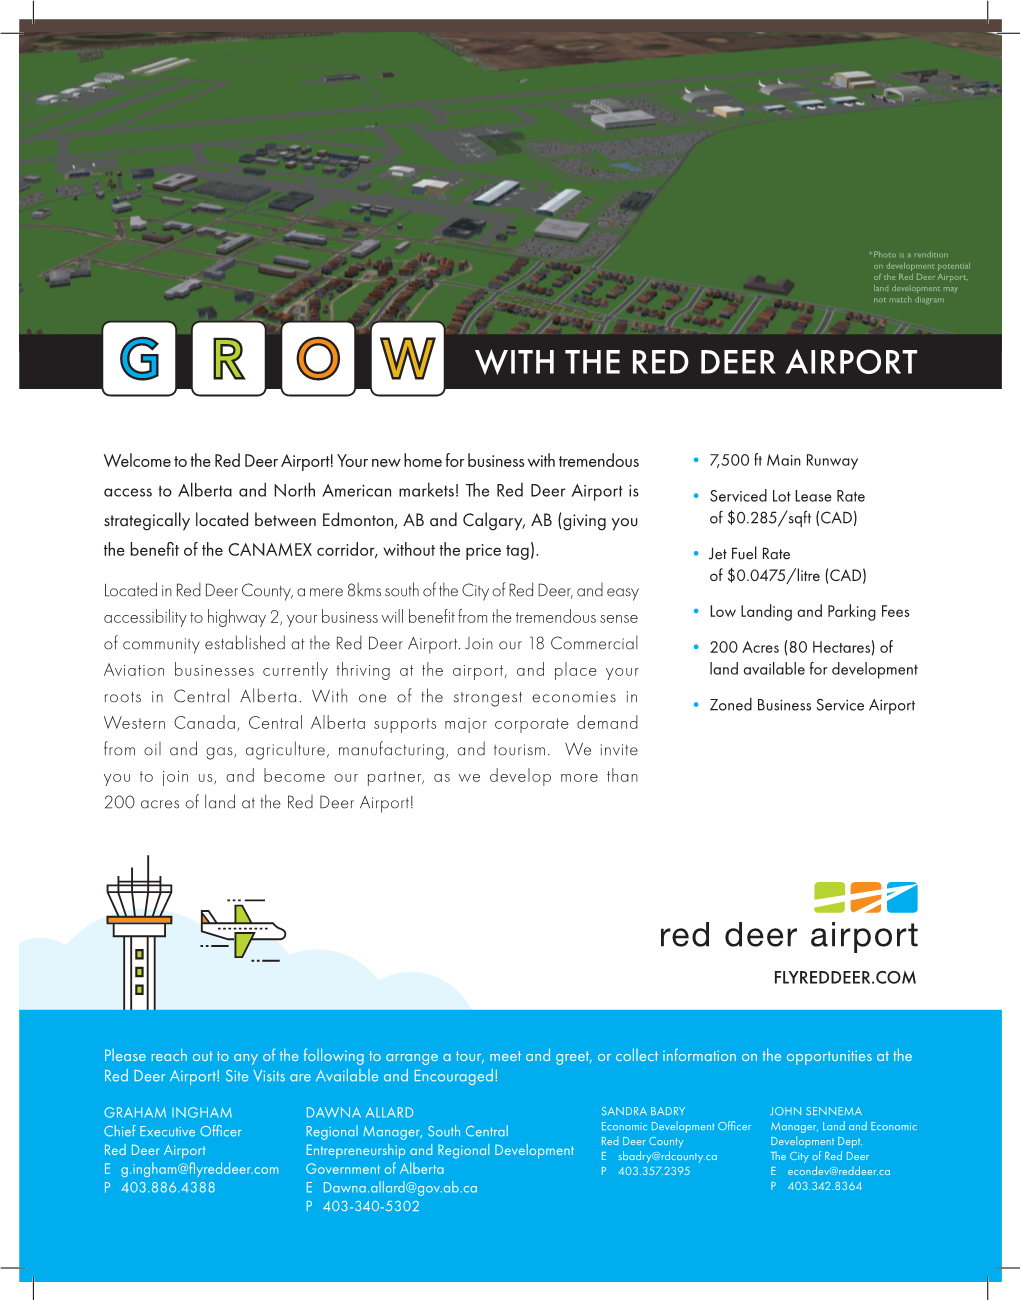 With the Red Deer Airport